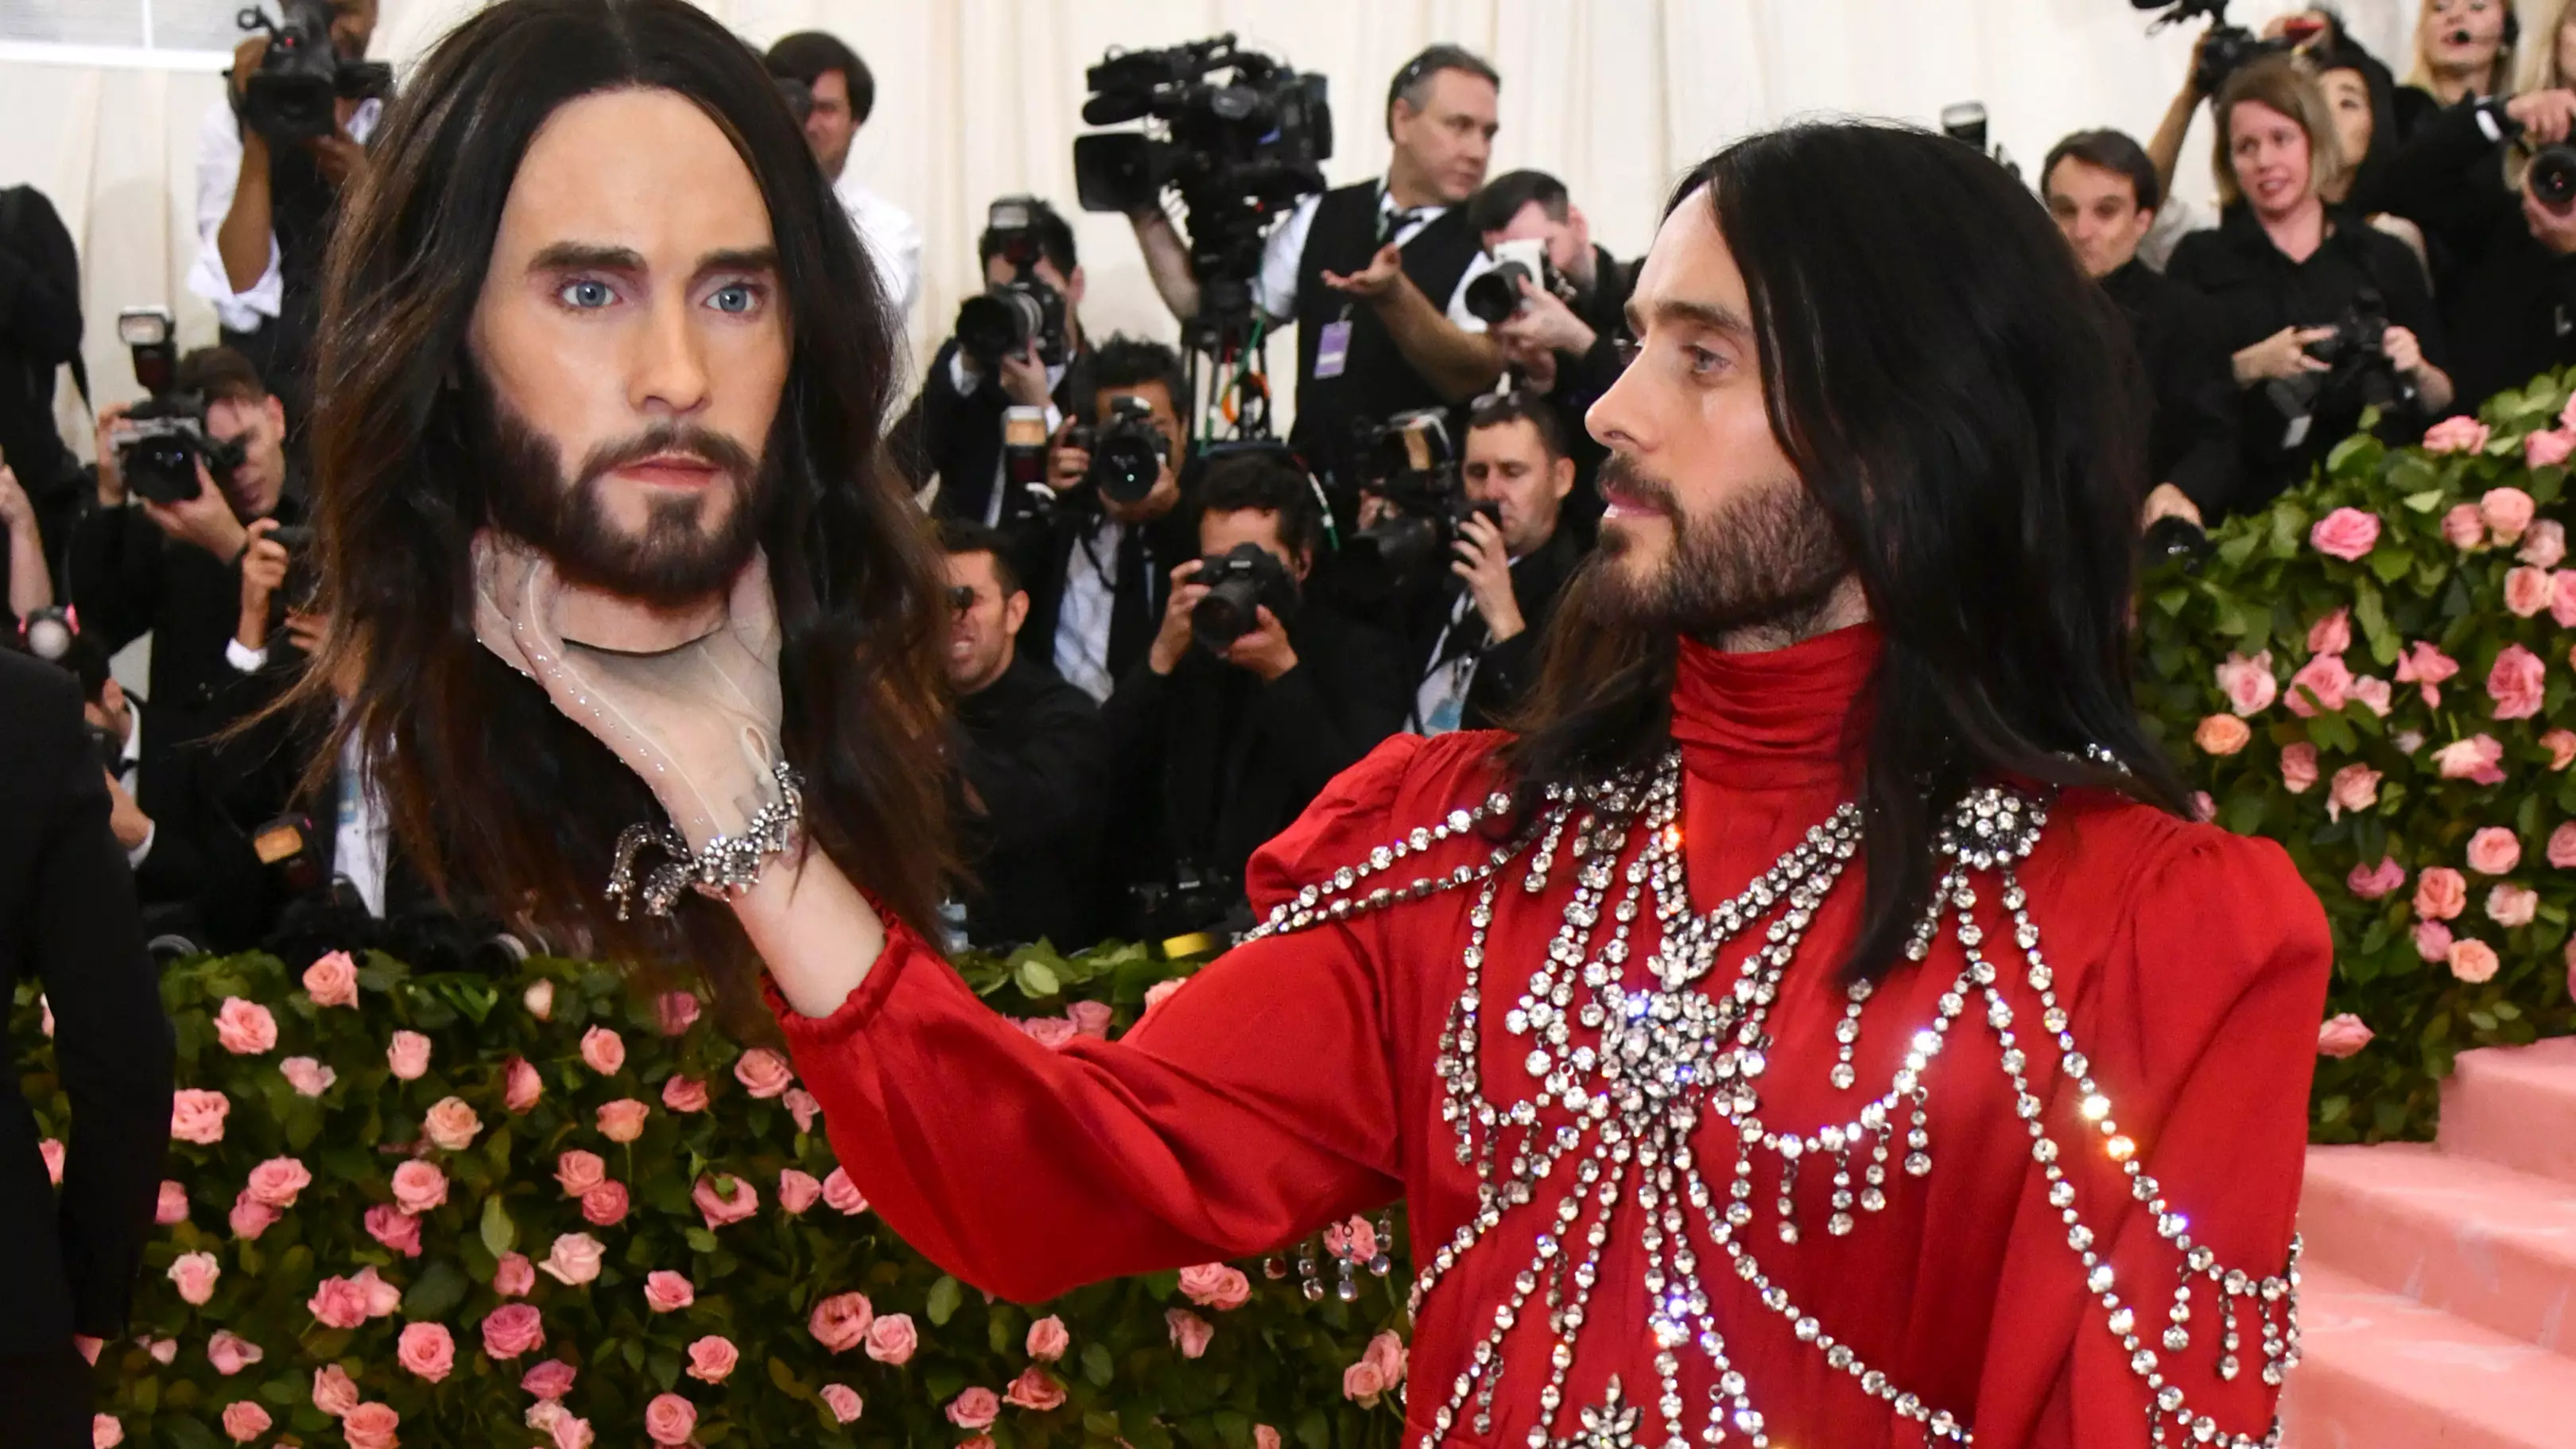 Jared Leto Takes Replica Of His Own Head To Met Gala